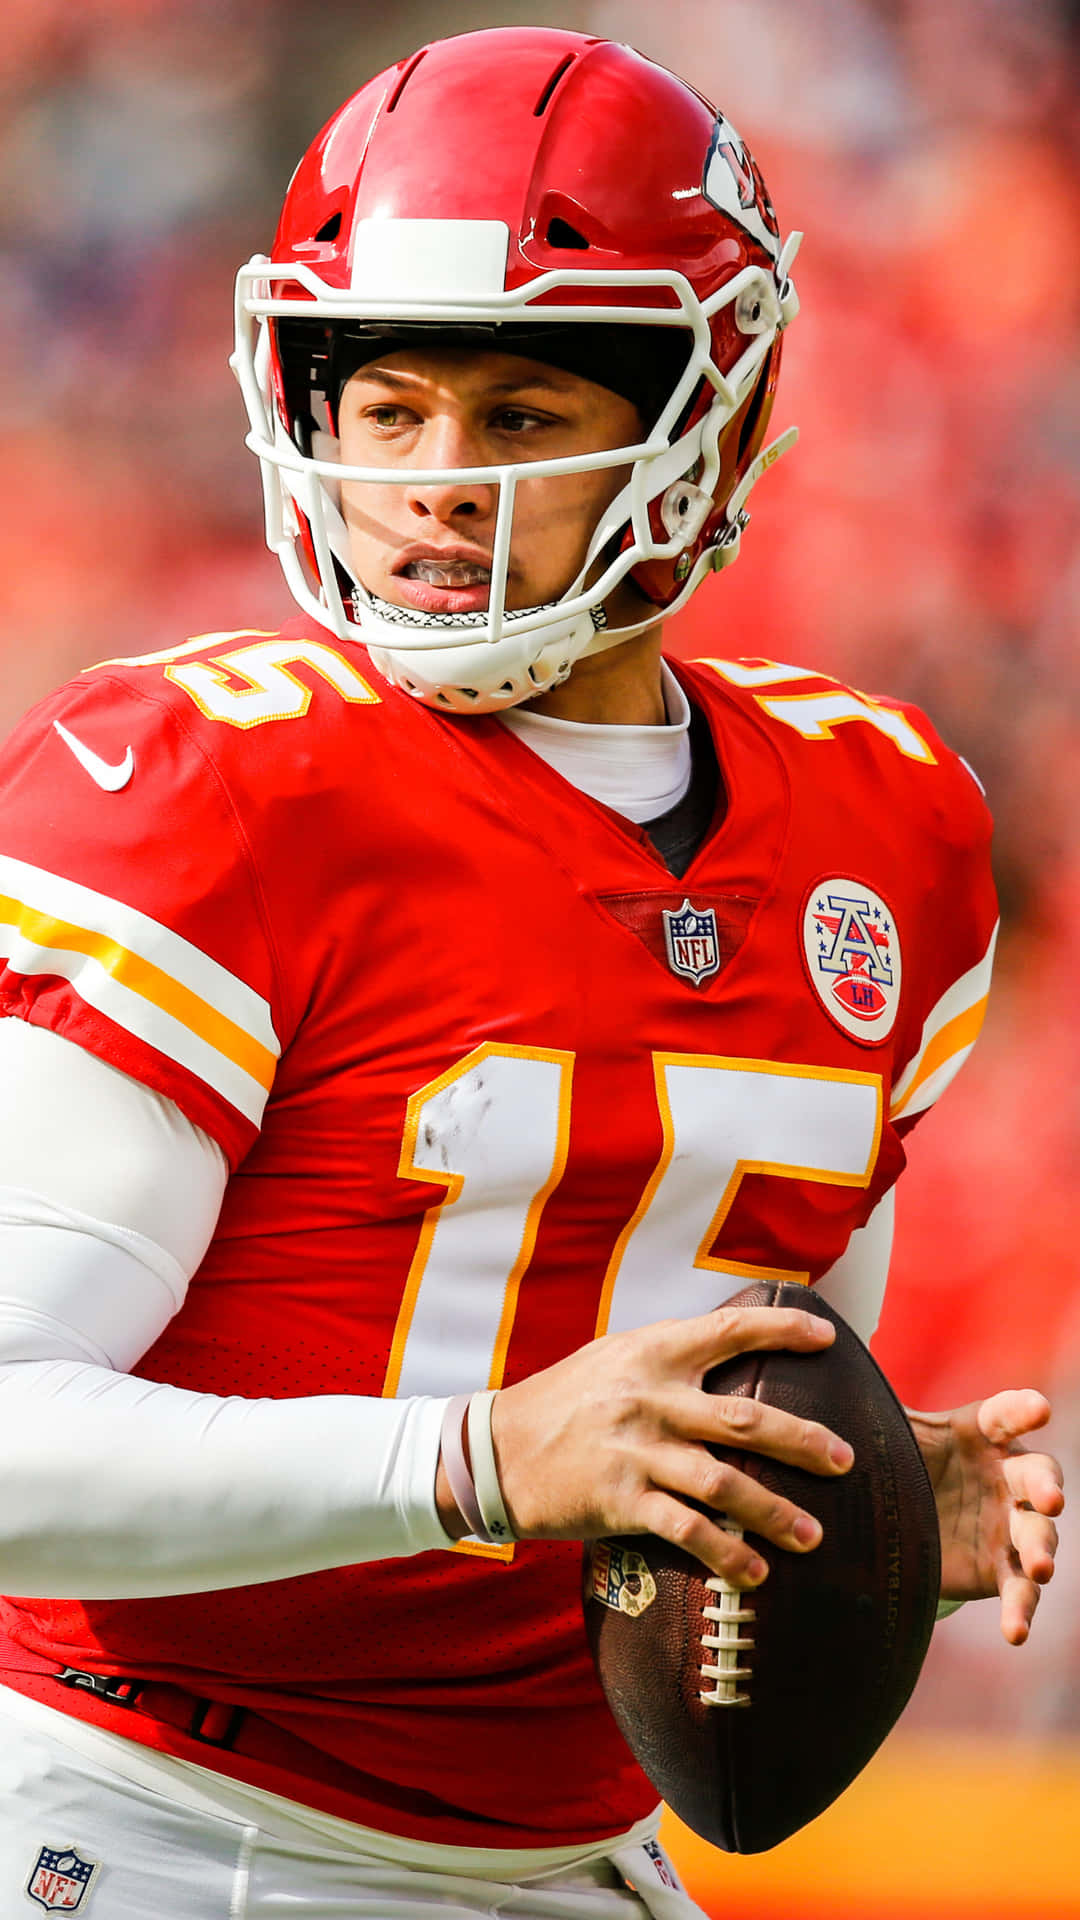 Patrick Mahomes Looking Cool In Kansas City Chiefs Uniform Background